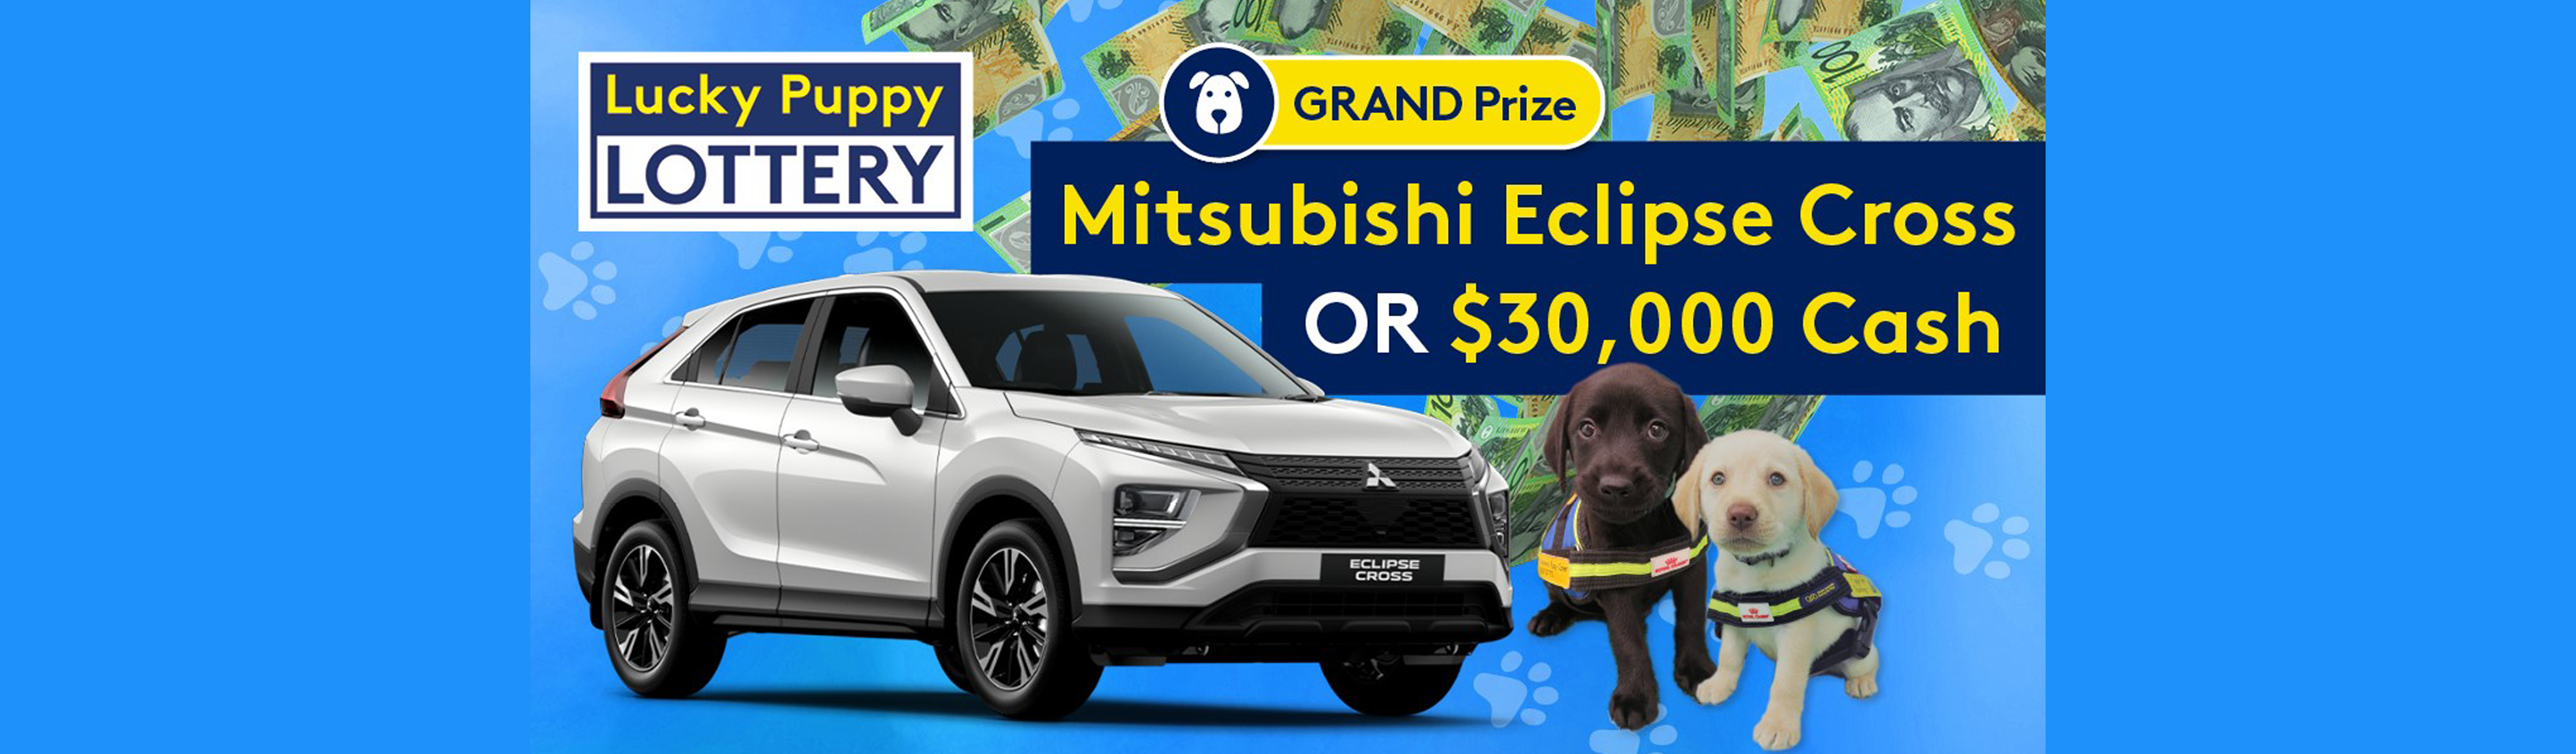 Lucky Puppy Lottery Grand Prize Mitsubishi Eclipse Cross or $30,000 cash. Image of a car and two young Seeing Eye Dog puppies